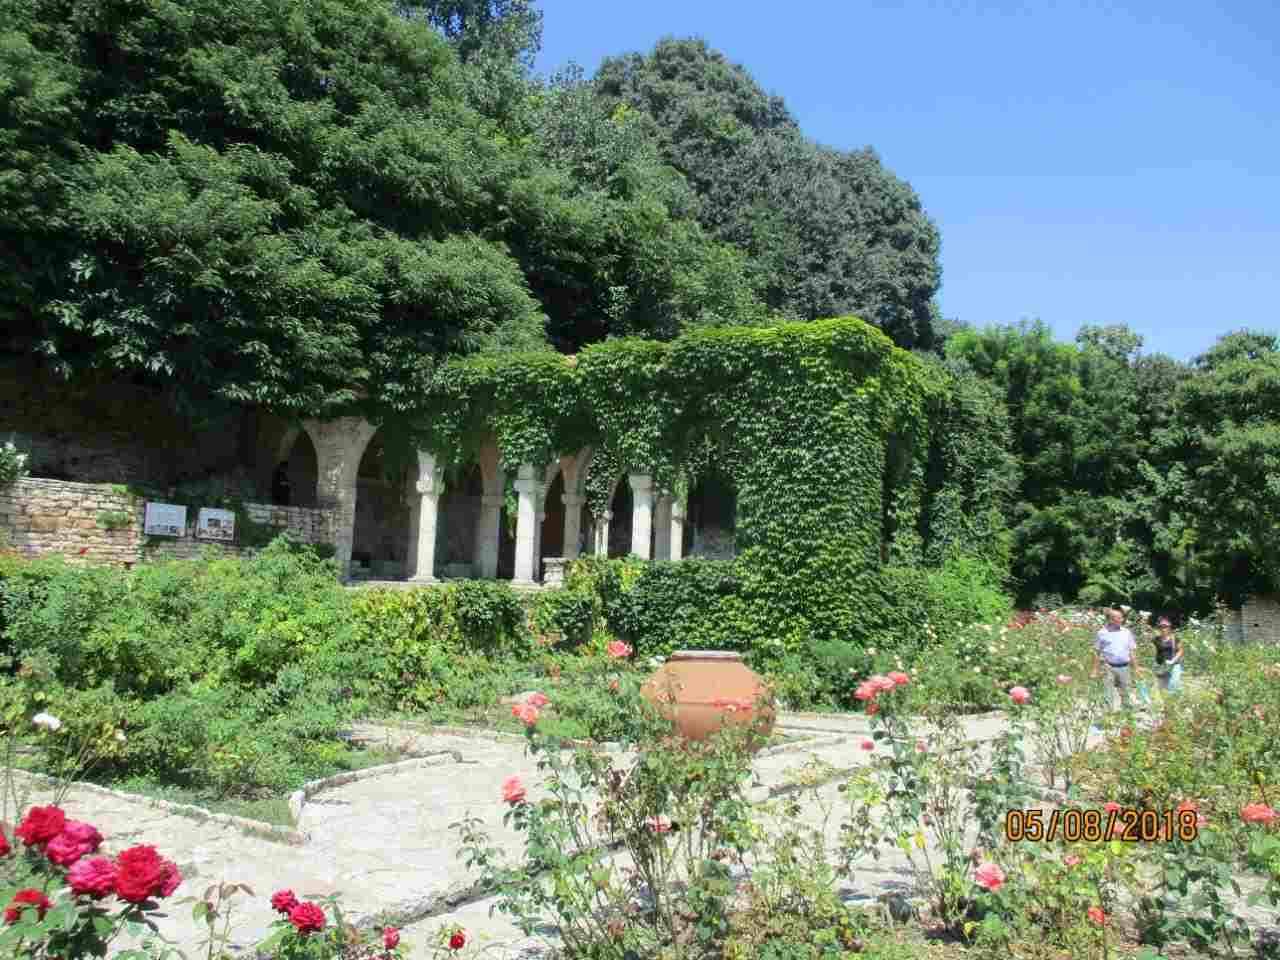 The Temple of Water in the rose garden